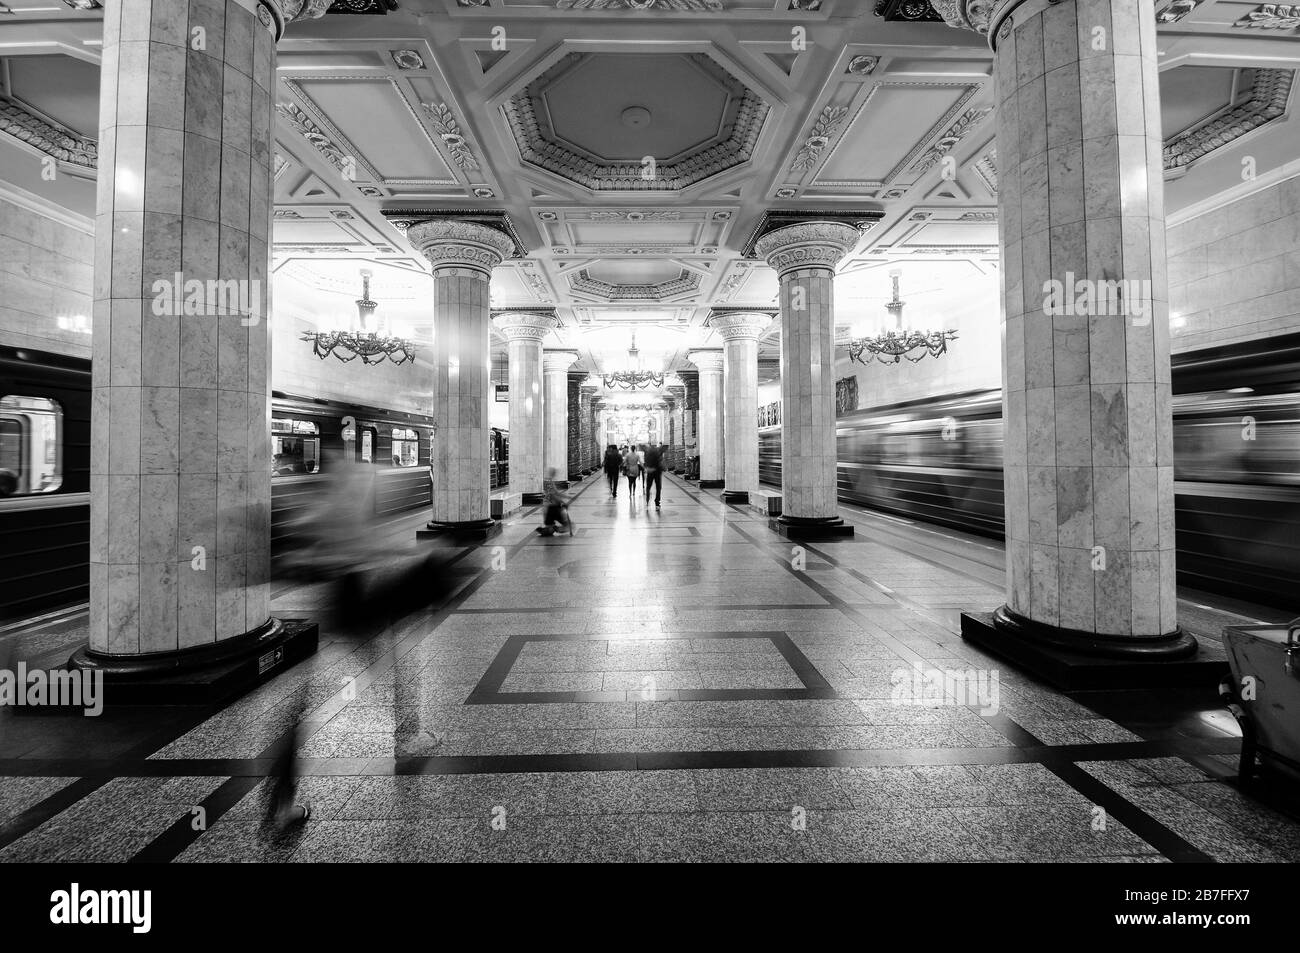 Subway stations in St Petersburg, Russia Stock Photo